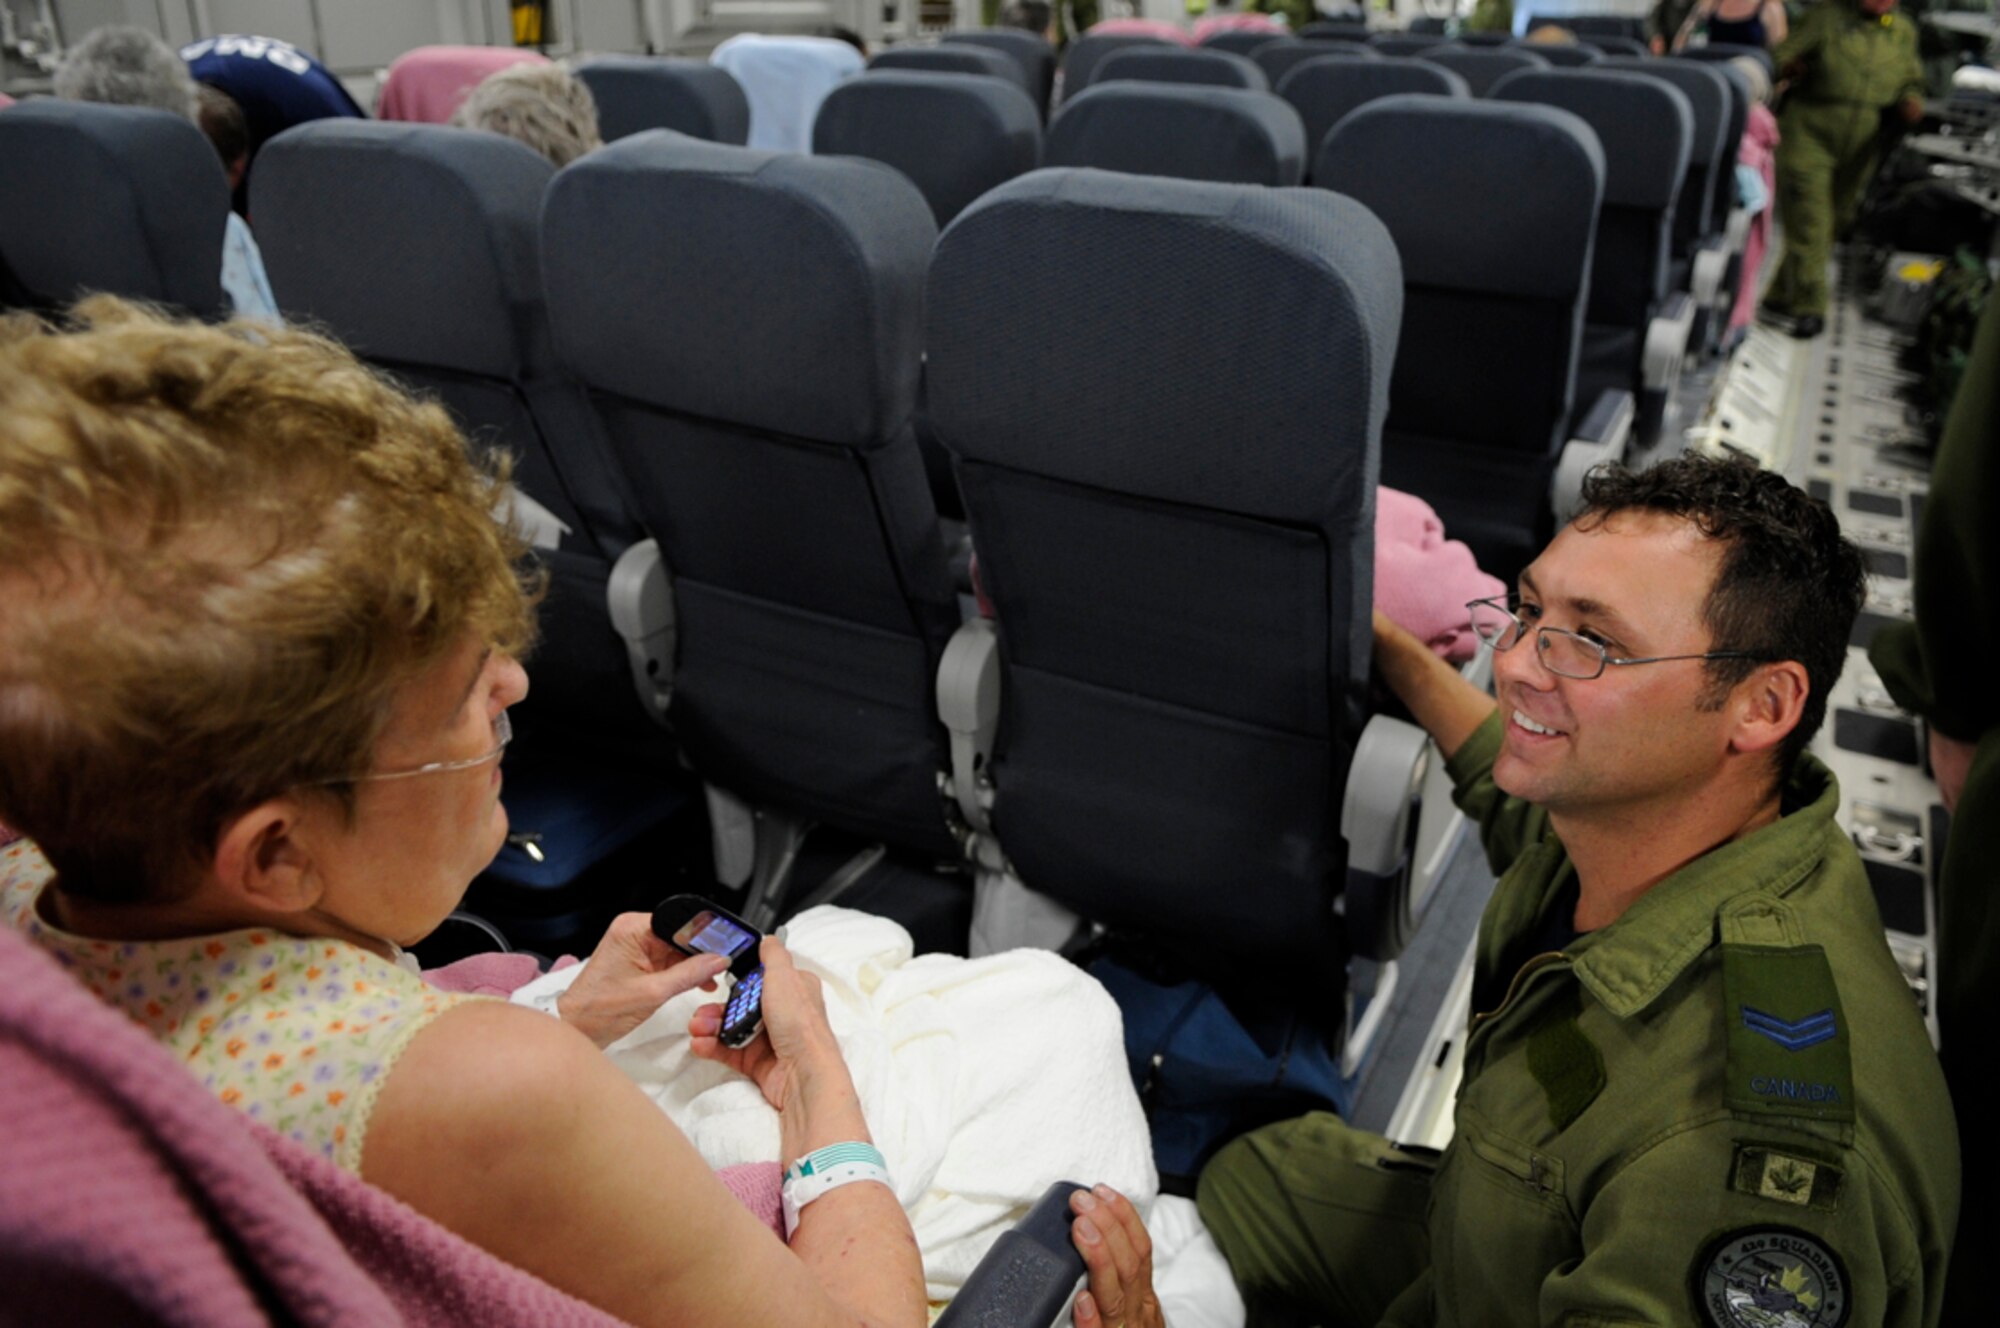 Canadian Air Force Cpl. Patrick Richer helps an evacuee of Hurricane Gustav board a flight the U.S. Federal Emergency Management Agency and The Department of Defense has chartered to transport citizens to destinations safely outside the hurricanes path at Lake Front Airport, New Orleans, LA., Aug. 31, 2008. (U.S. Air Force photo by Staff Sgt. Shawn Weismiller)